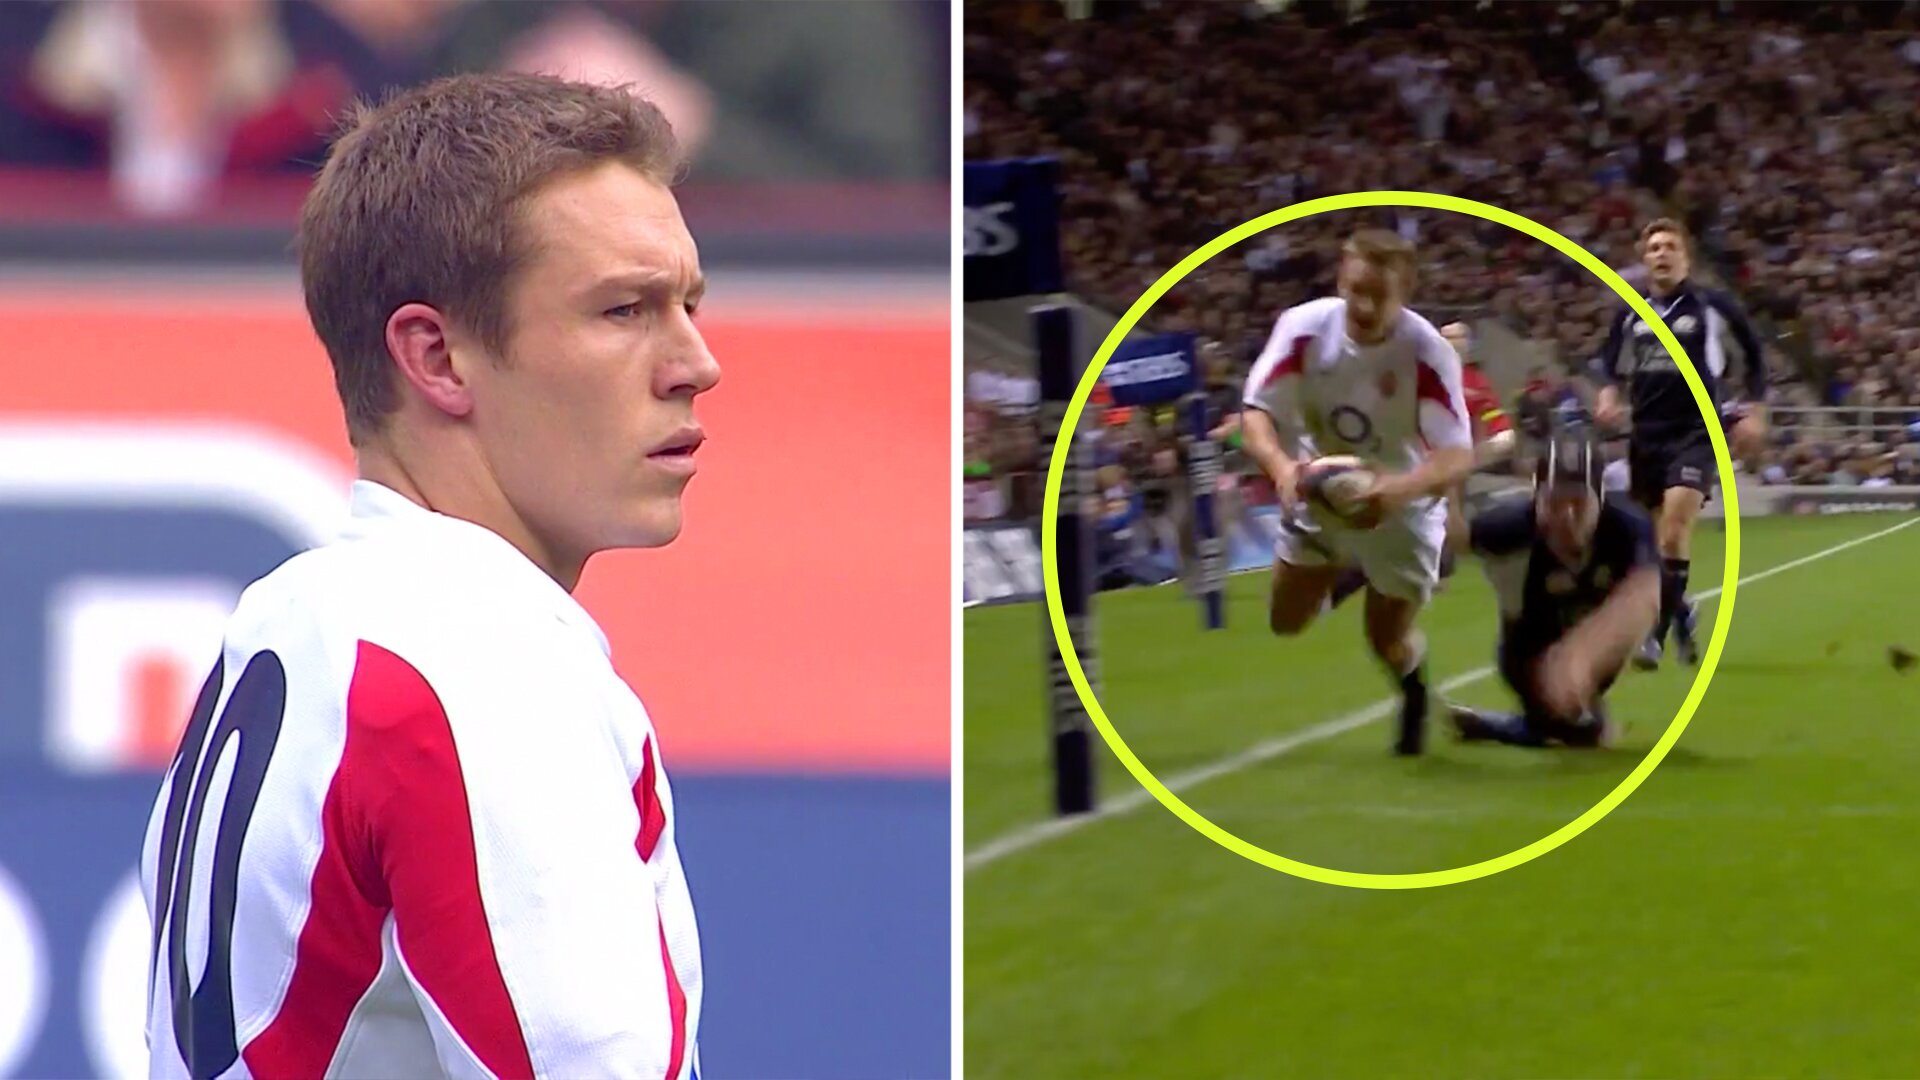 On this day in 2007 Jonny Wilkinson amazed the rugby world against Scotland